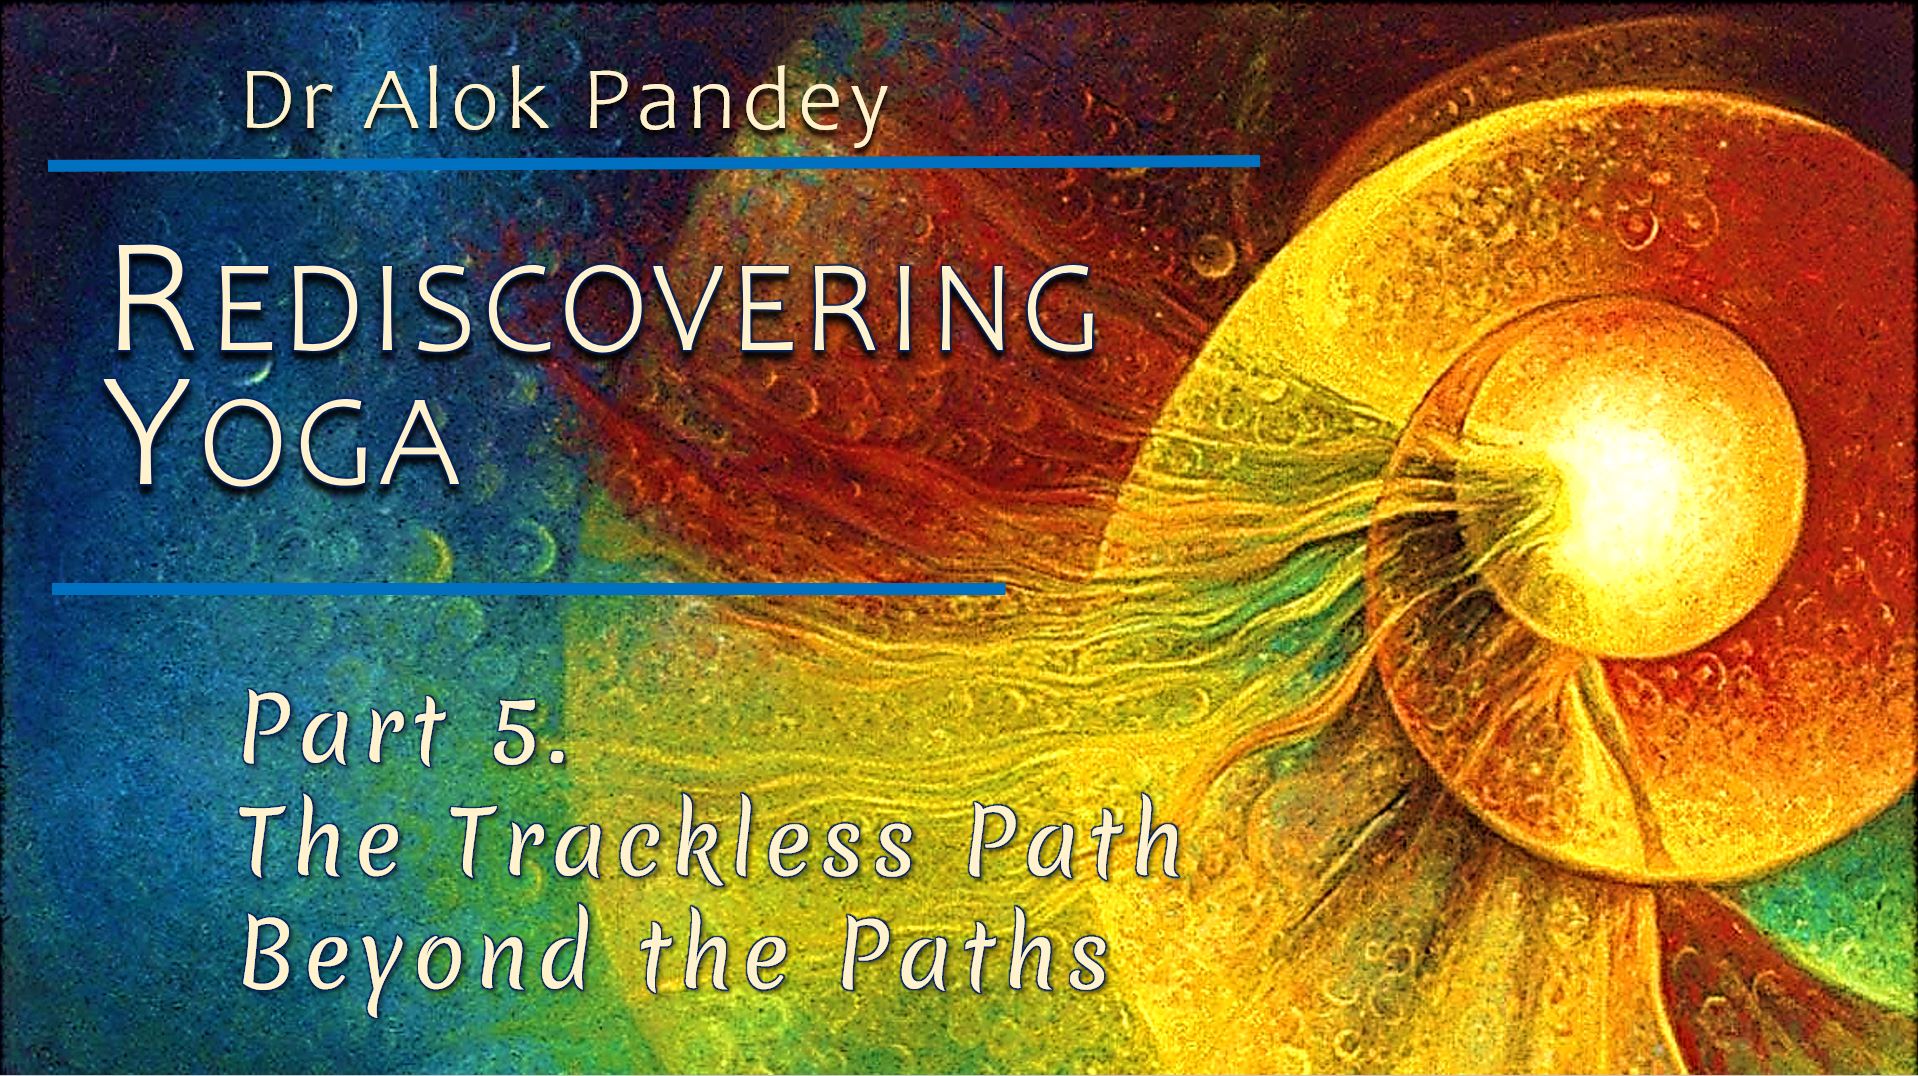 Rediscovering Yoga 5: The Trackless Path Beyond the Paths - AuroMaa